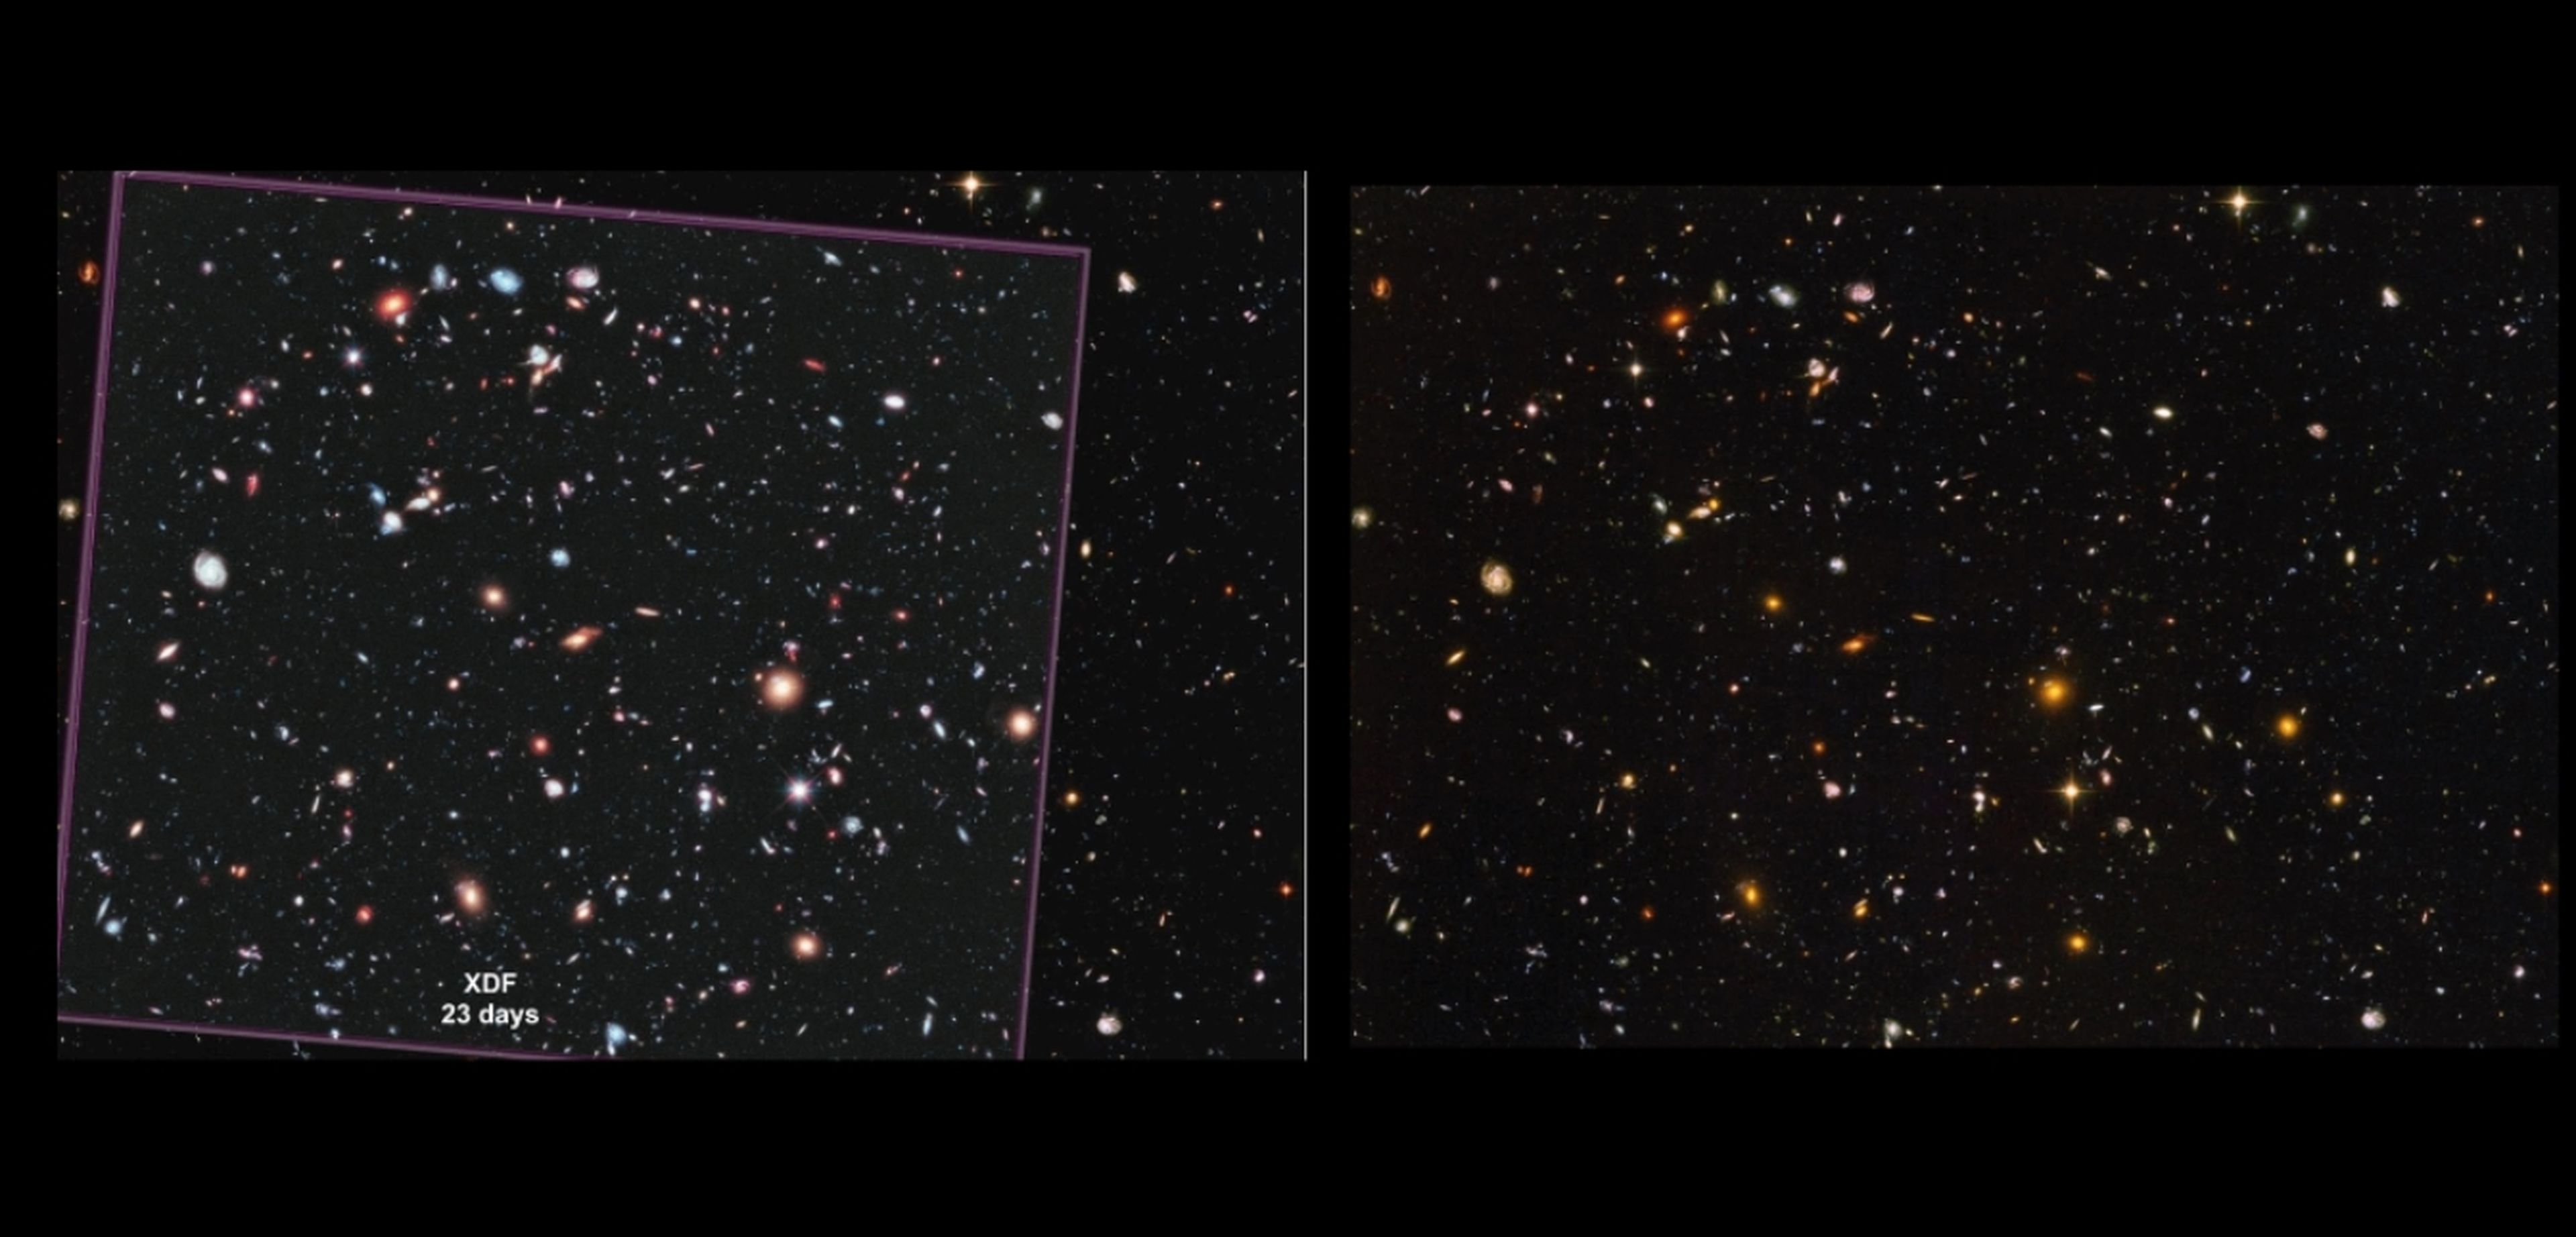 Image captured by JWST (left) and image captured by Hubble (right).